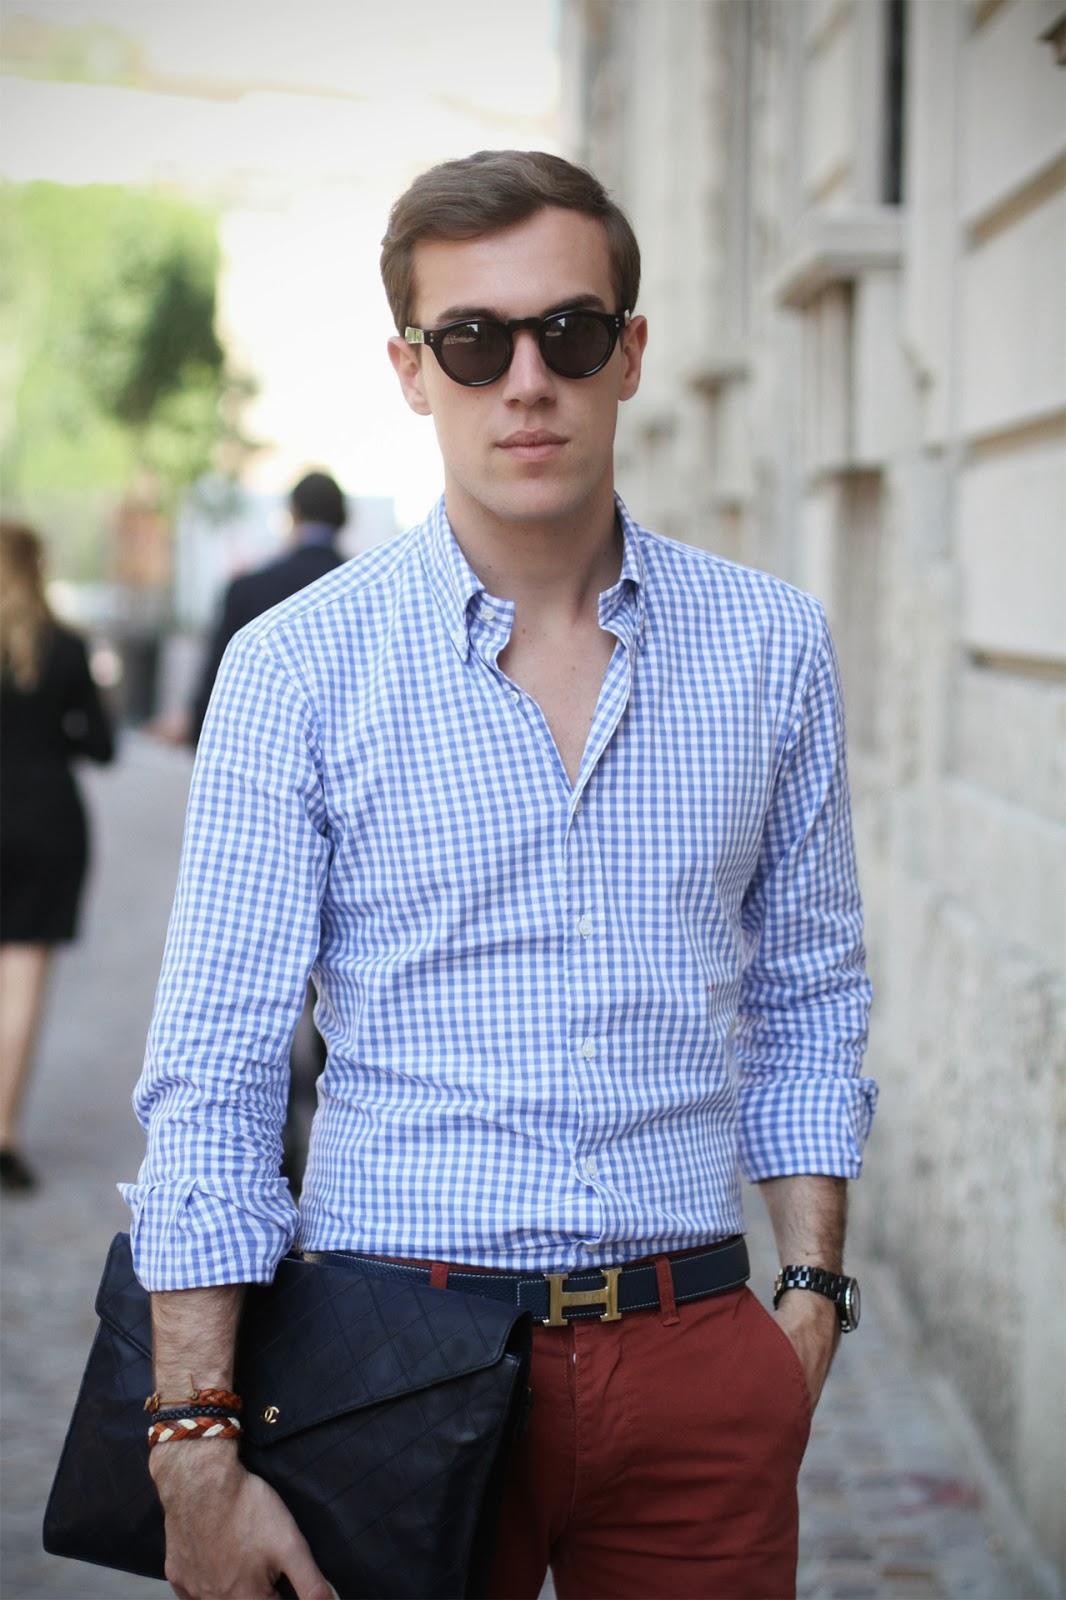 style NOT fashion: The Classic Hermes Belt